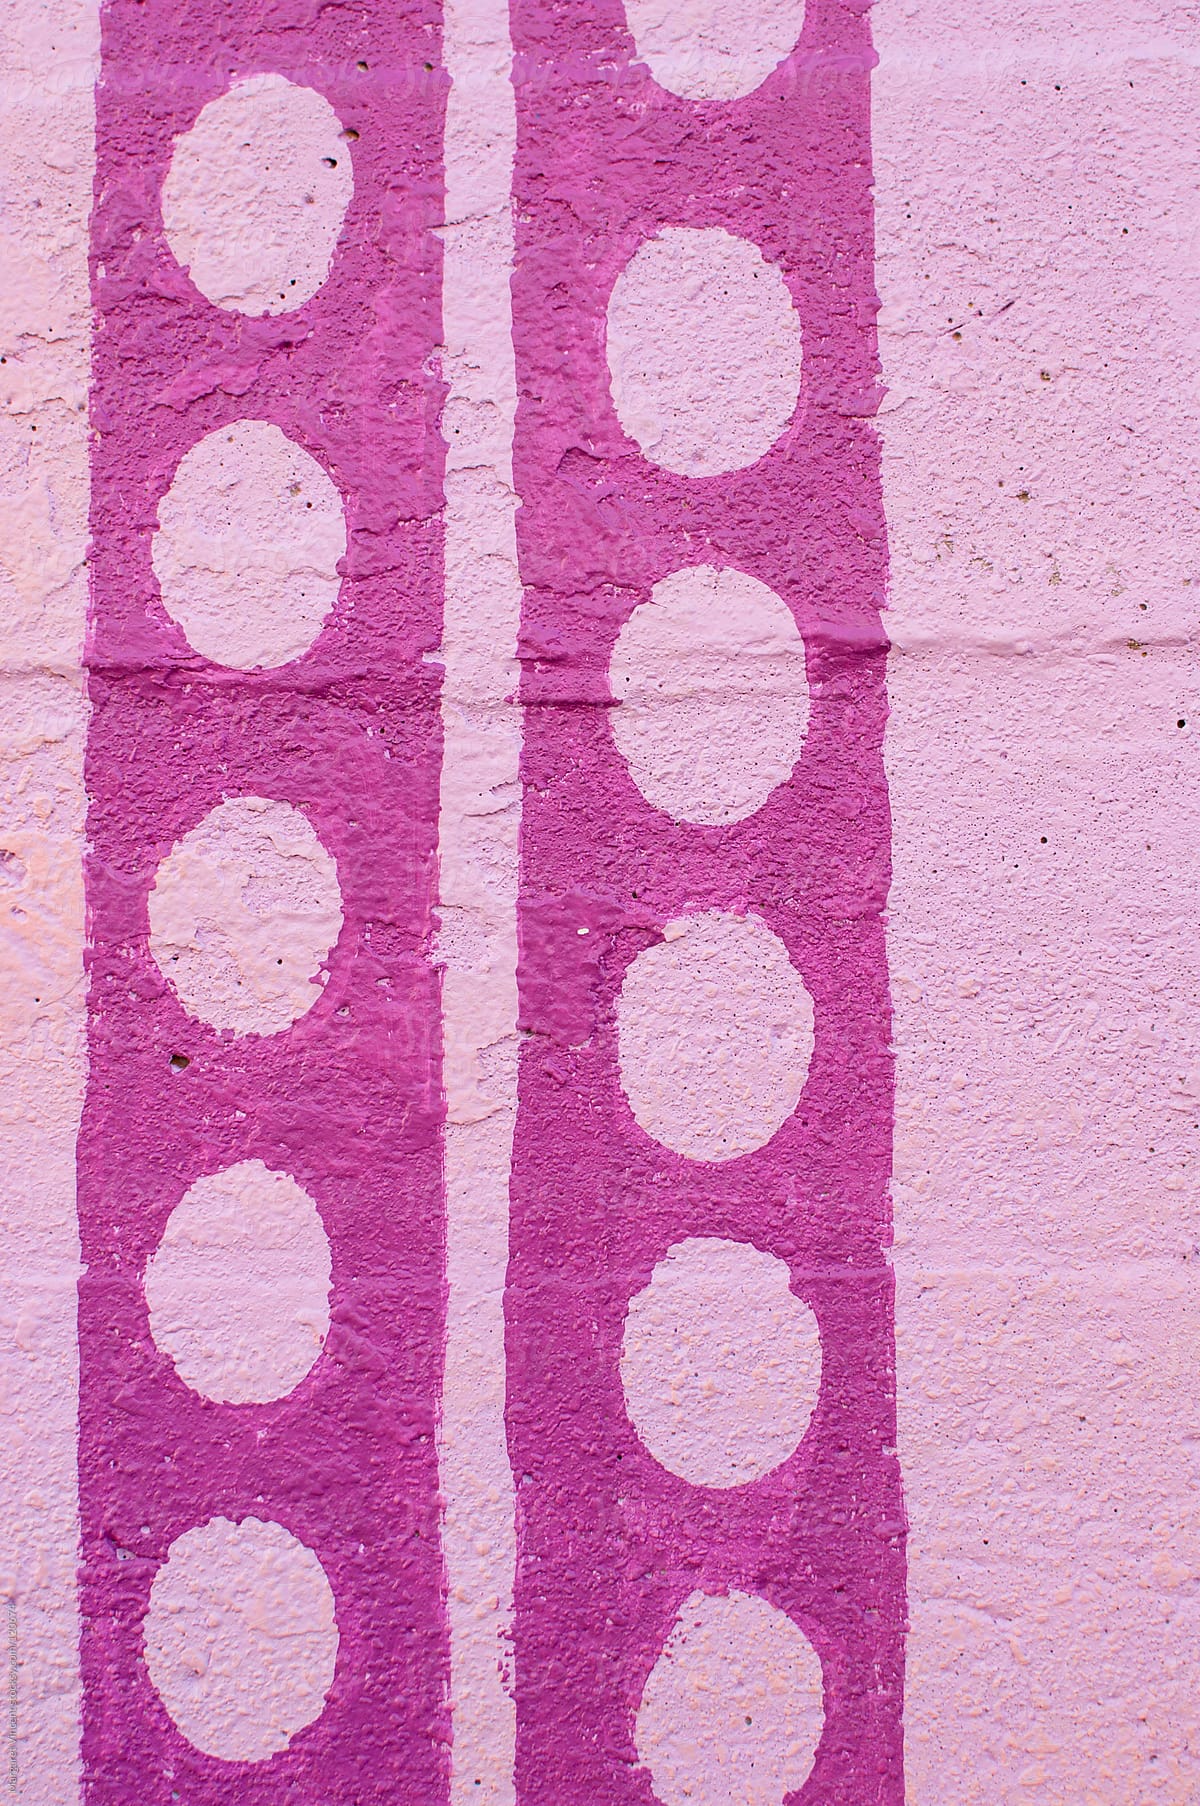 details of a city mural